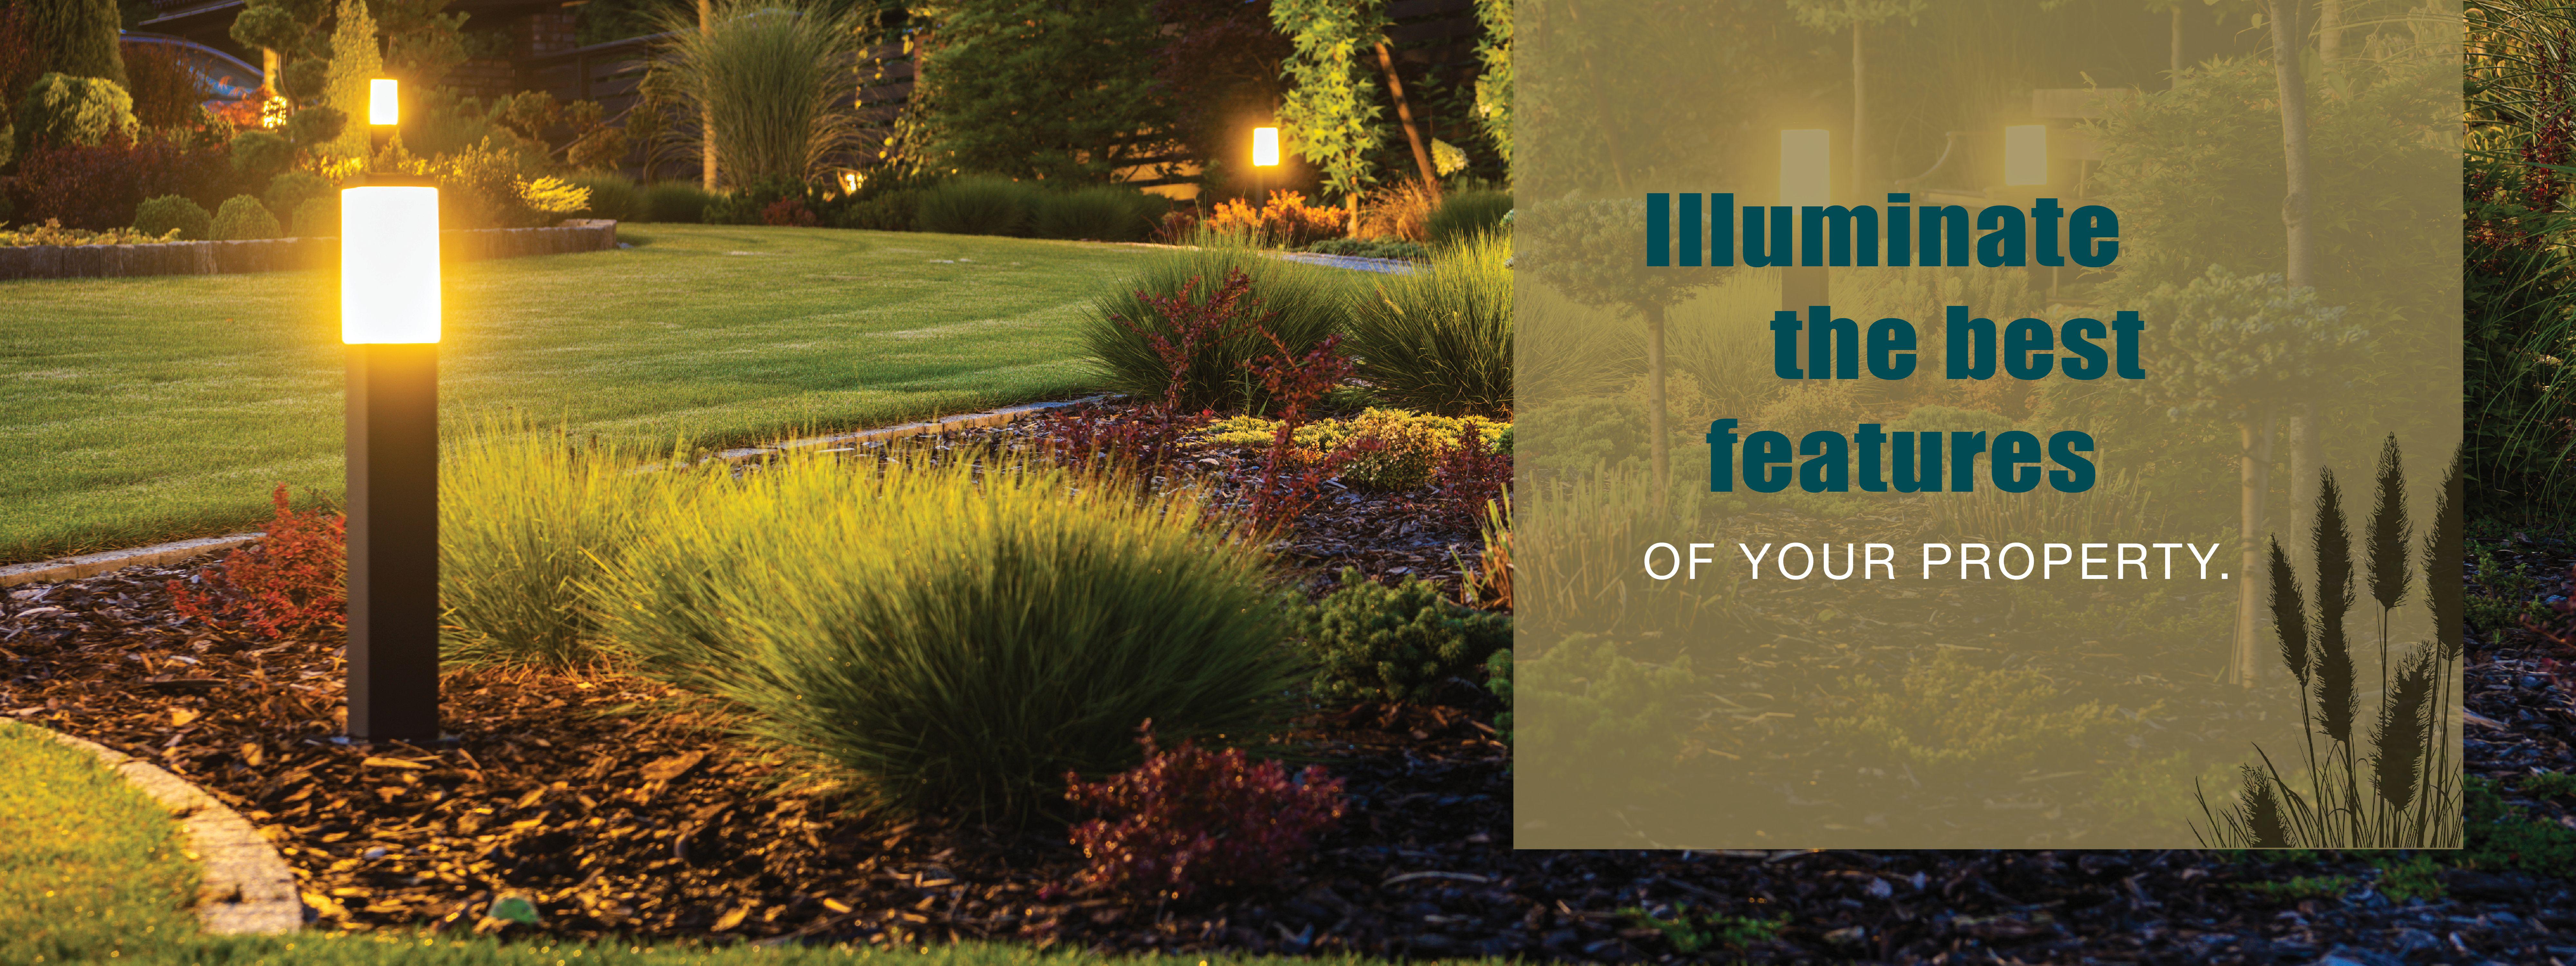 US Lawn & Landscape designs and installs custom outdoor lighting systems throughout South Central Kentucky area. Whether it be a private home, development or commercial location, we can custom design an outdoor landscape lighting system that fits your needs in an artful way.

Design, Installation & Maintenance
Quality fixtures and wiring
5 year LED Warranty